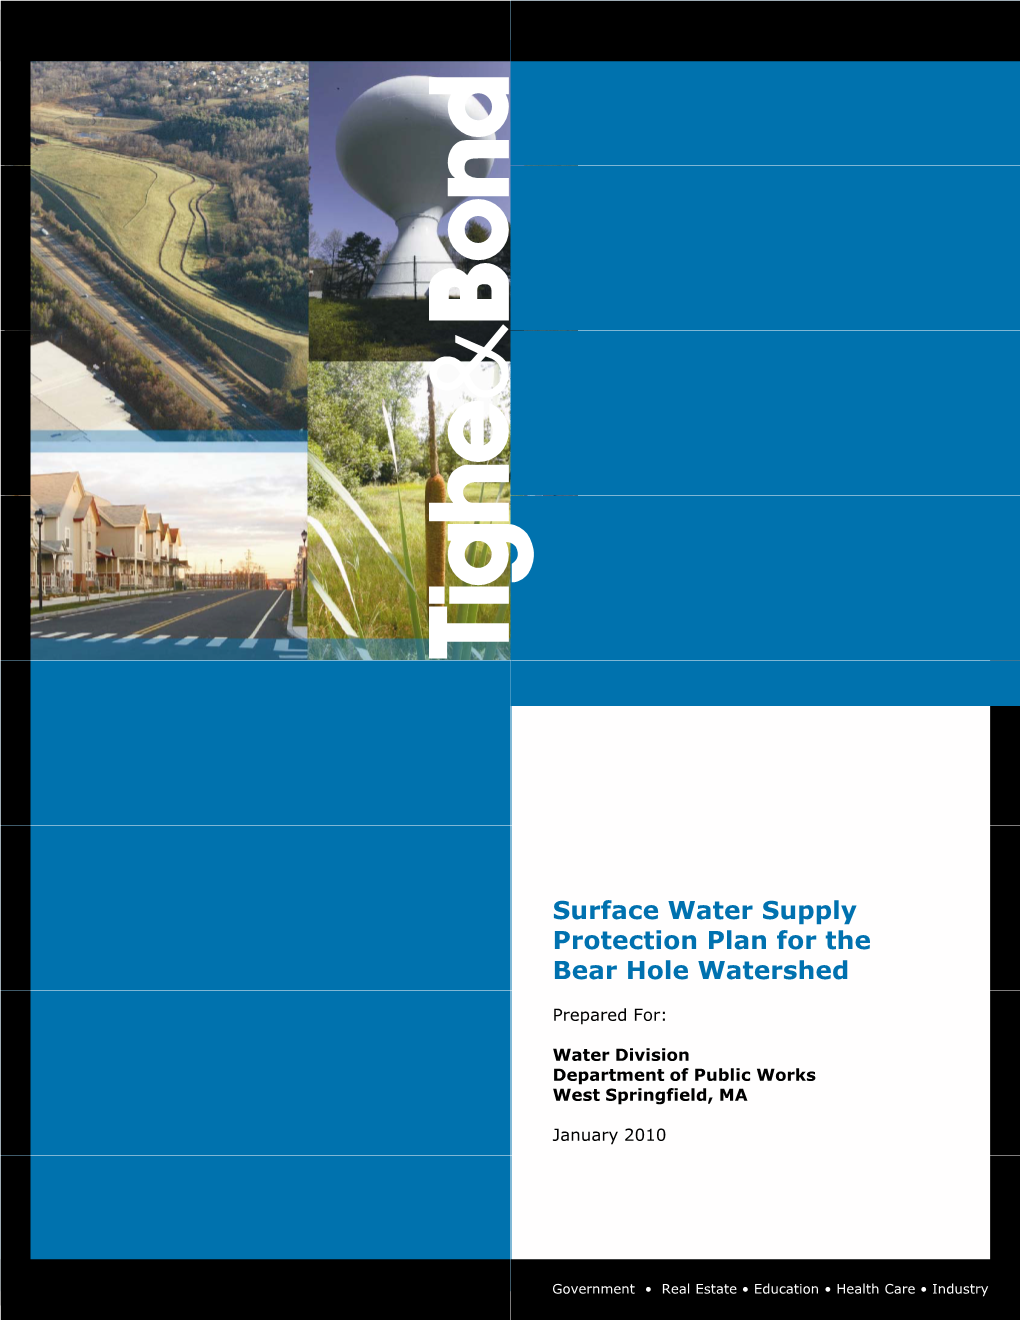 Surface Water Supply Protection Plan for the Bear Hole Watershed